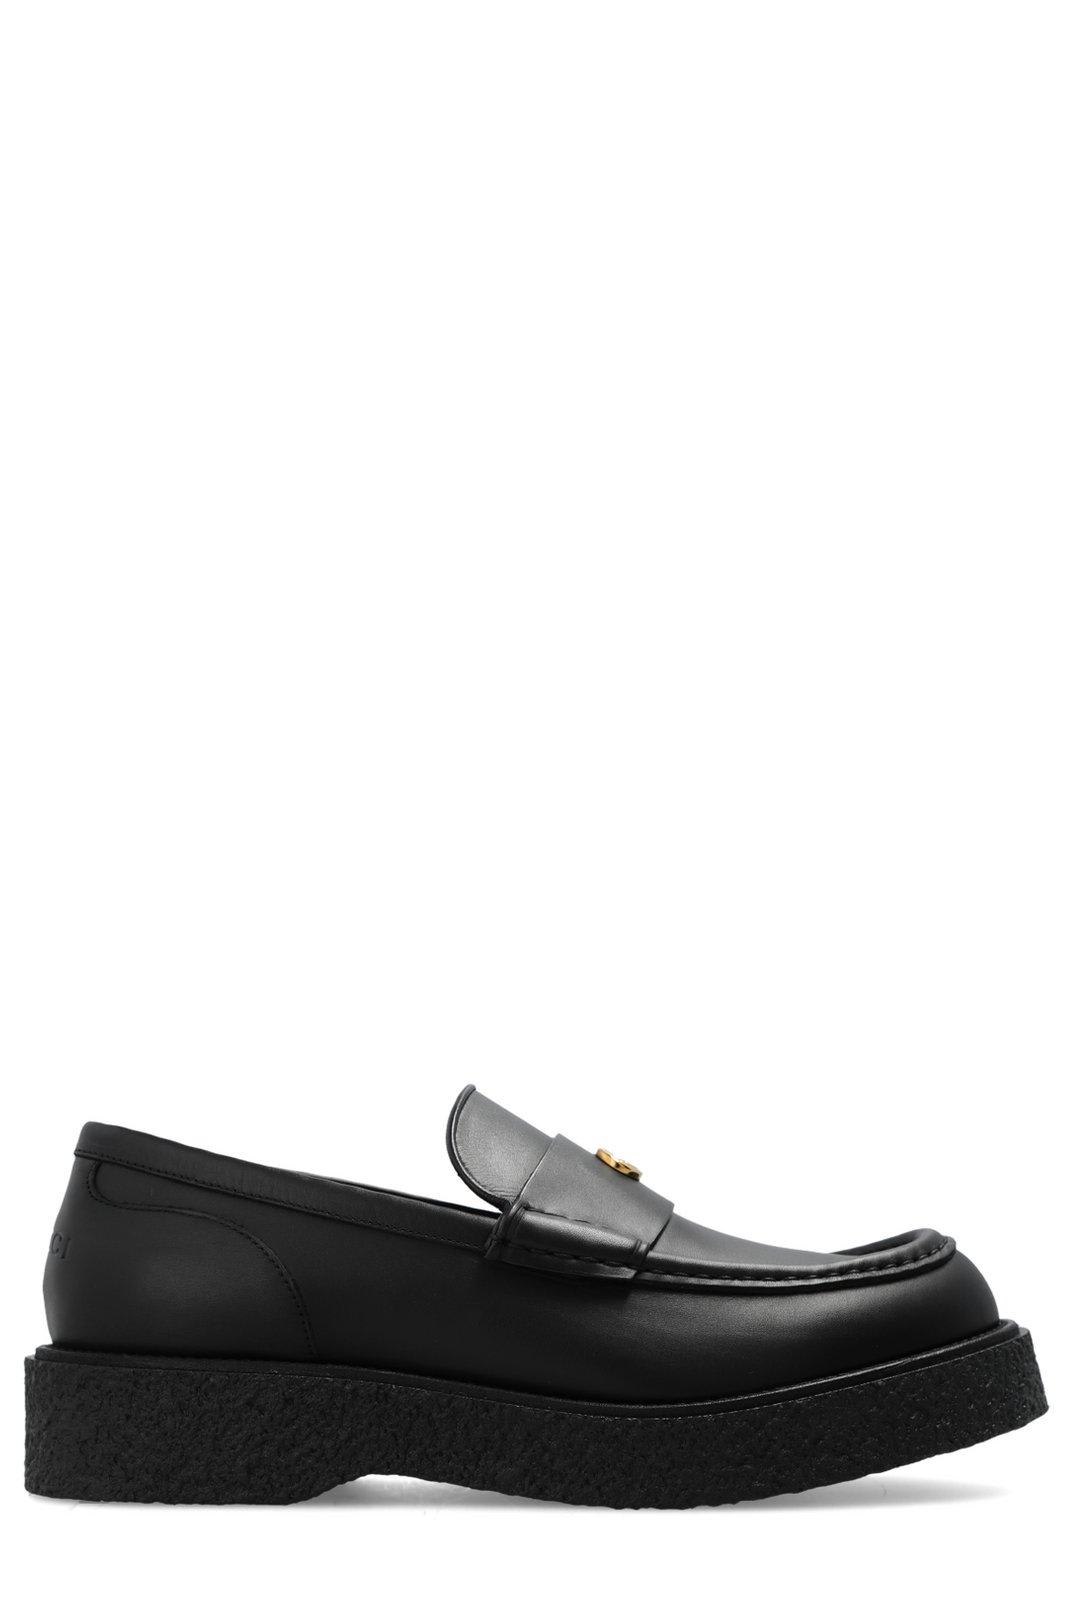 Gucci Logo Plaque Slip-on Loafers